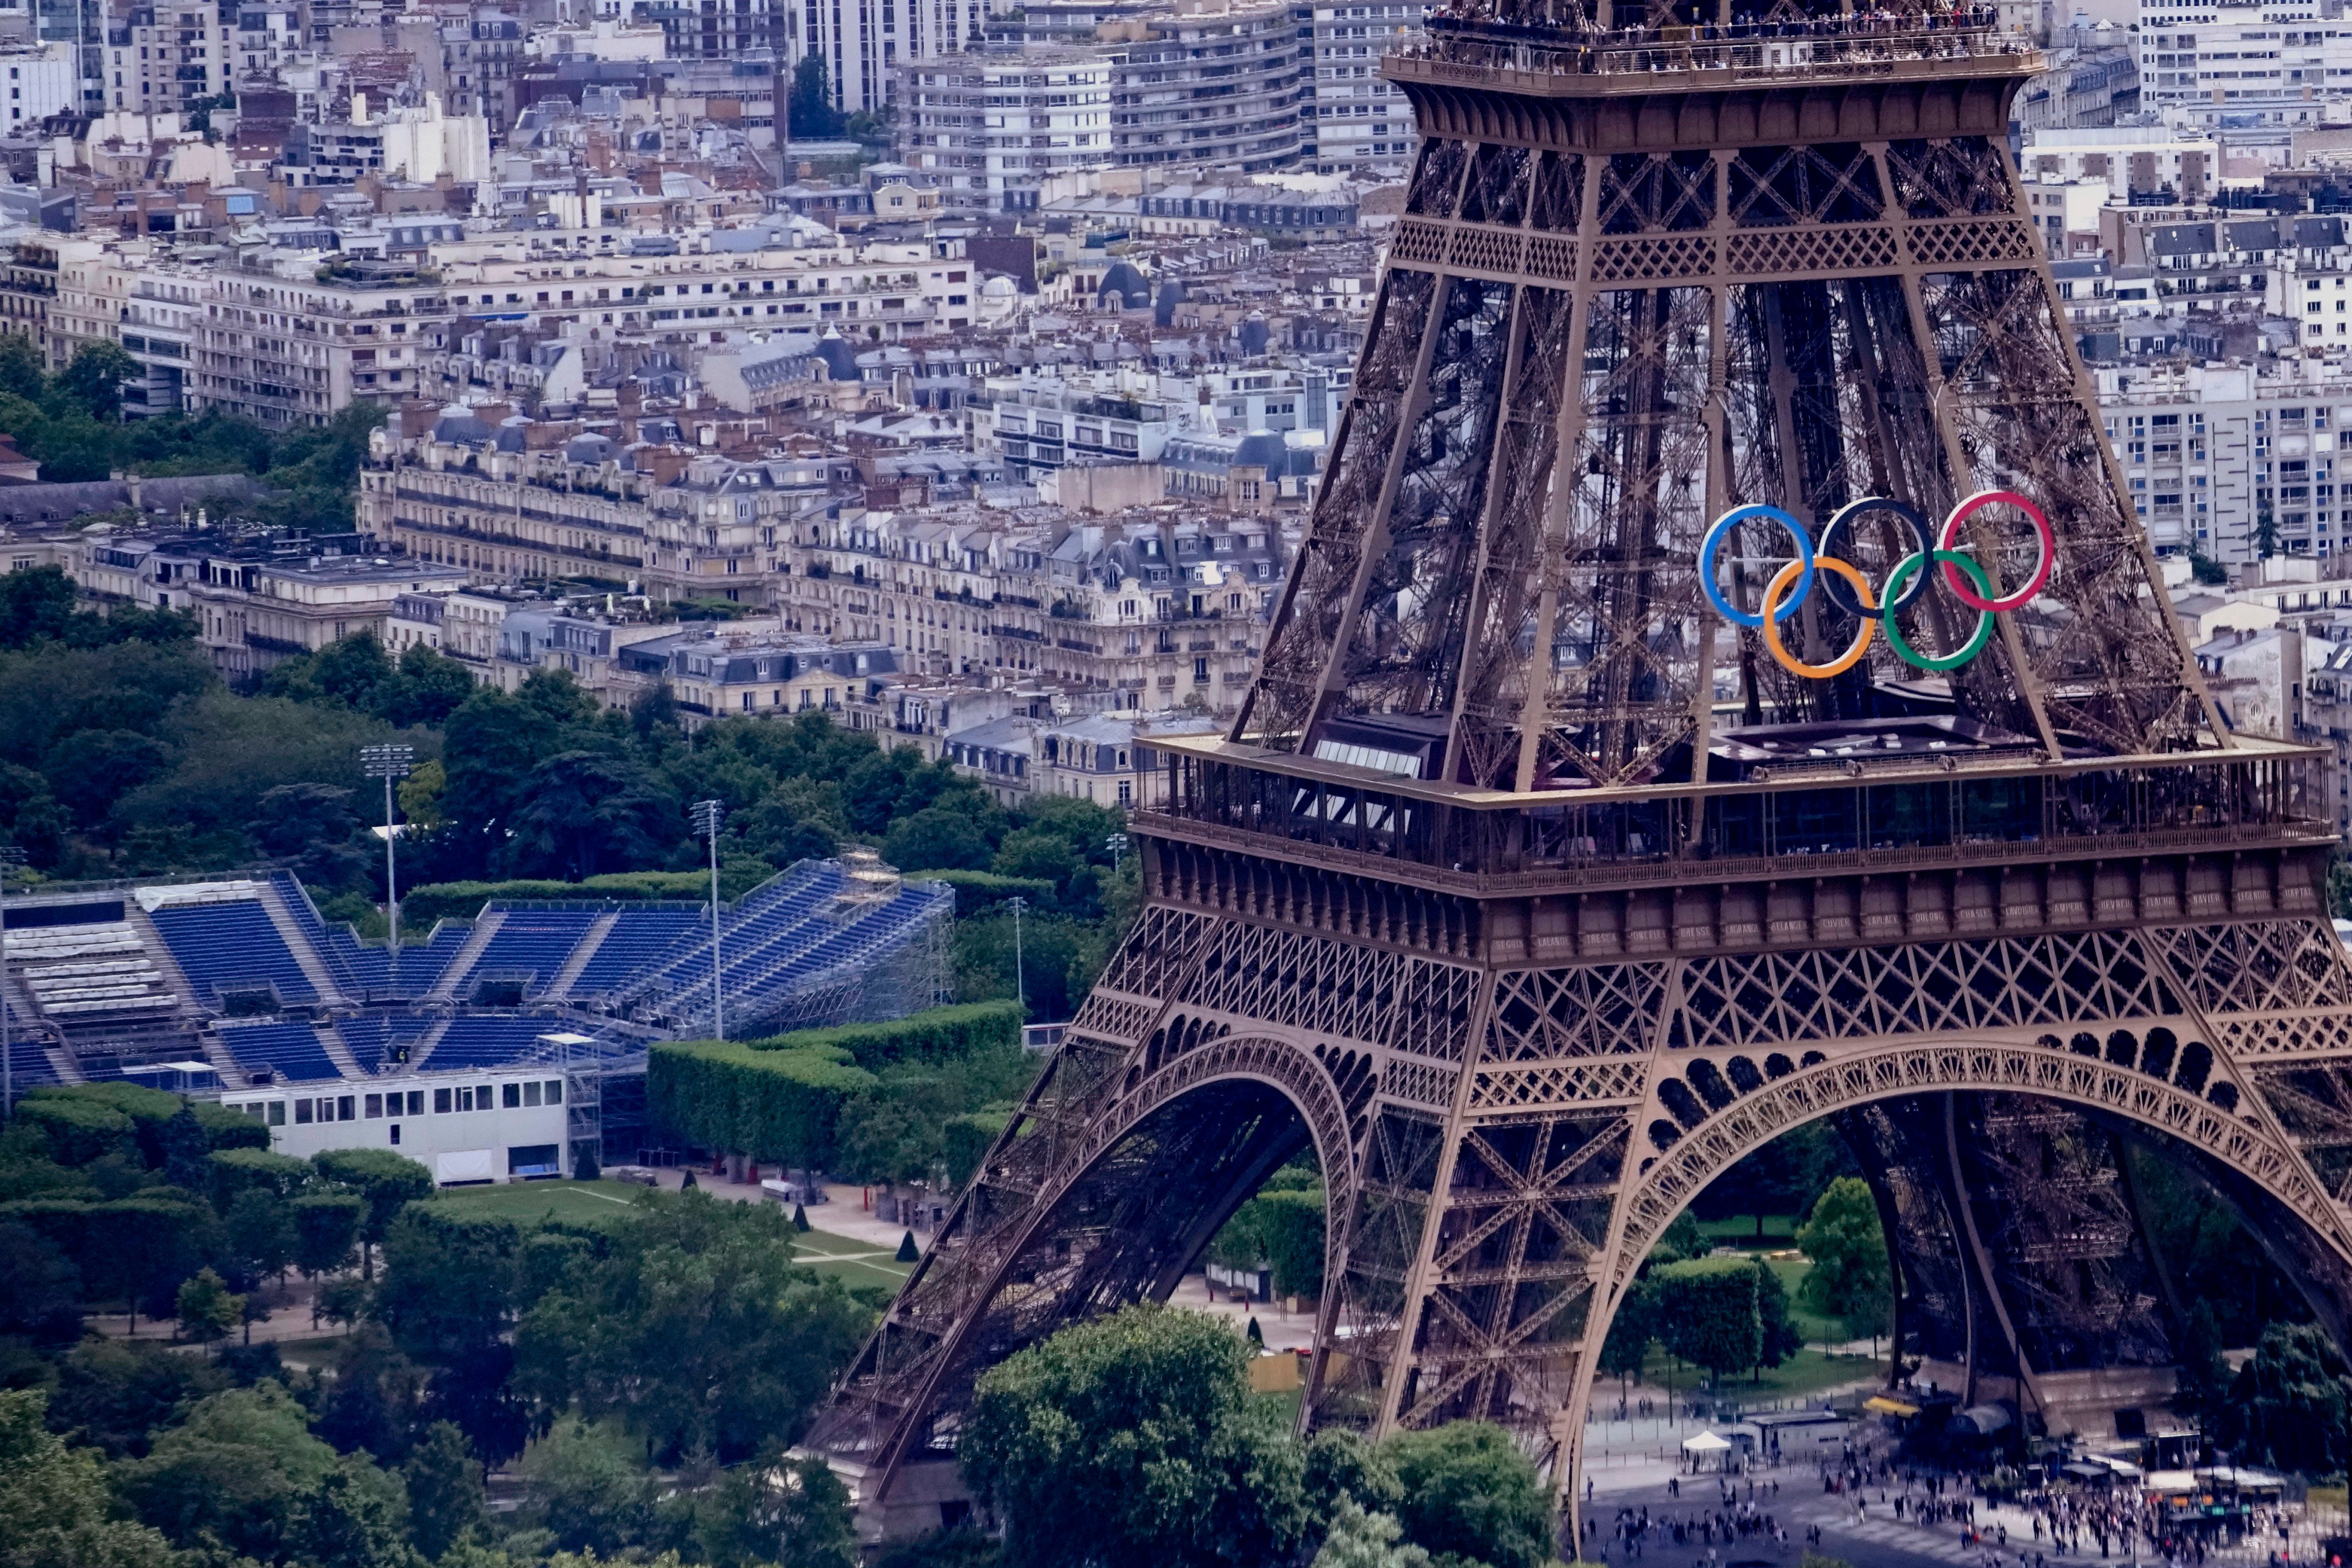 The Olympic rings are seen on the Eiffel Tower in Paris. The Champ-de-Mars on the left will host the beach volleyball. Photo: AP